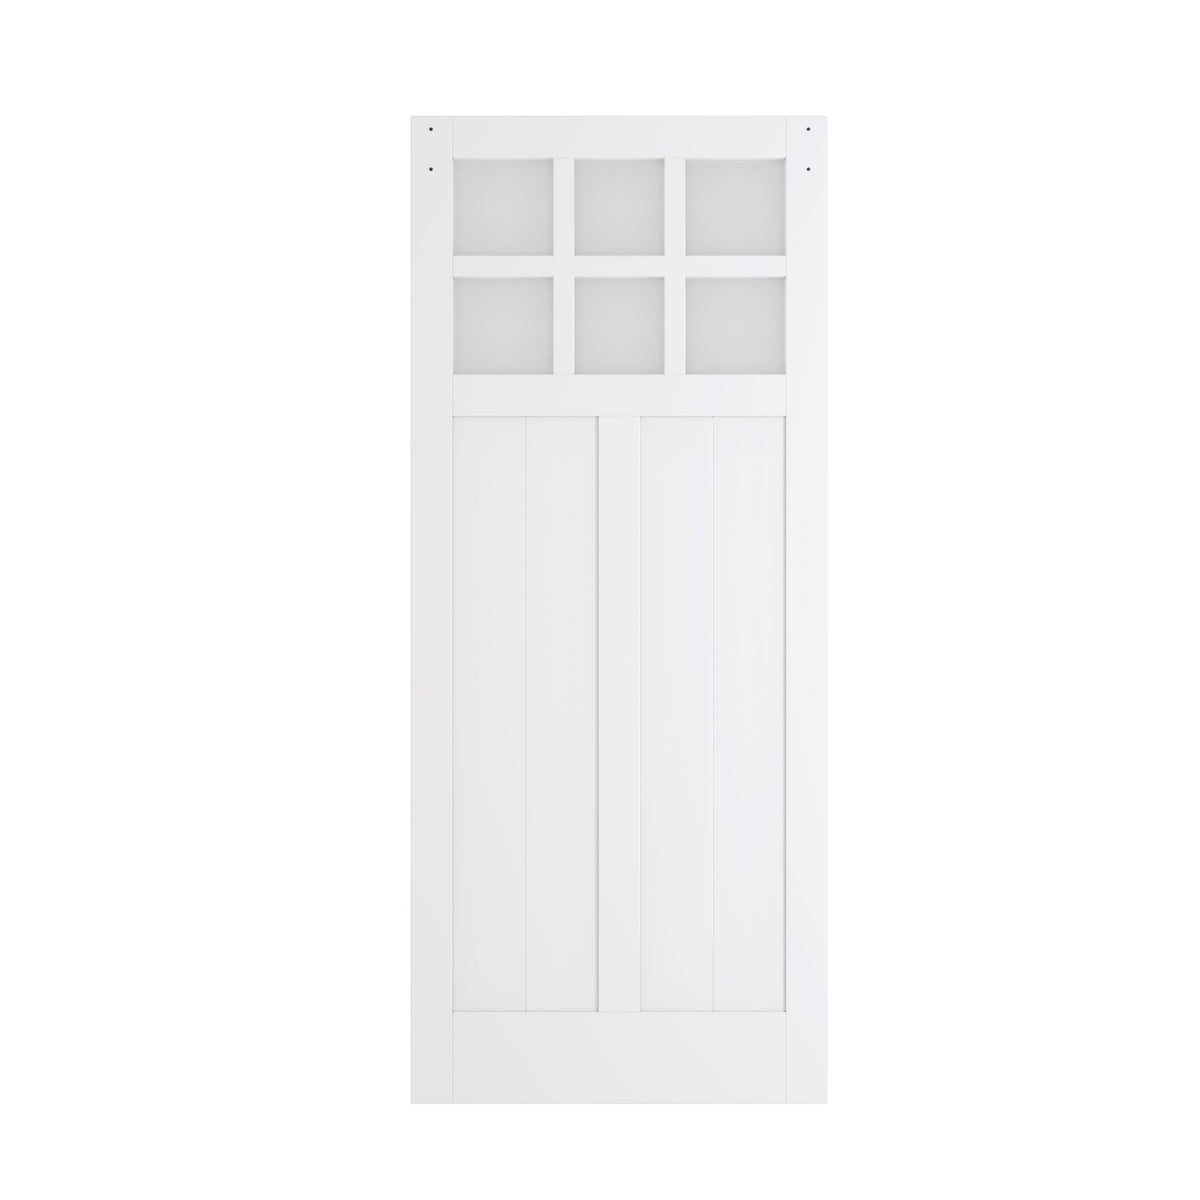 TENONER Sliding Barn Door Hardware Kit & Handle, White, MDF, 36'' × 84'', with Waterproof Covering, Unfinished Panelled Slab, Pre-drilled Holes, Easy Installation